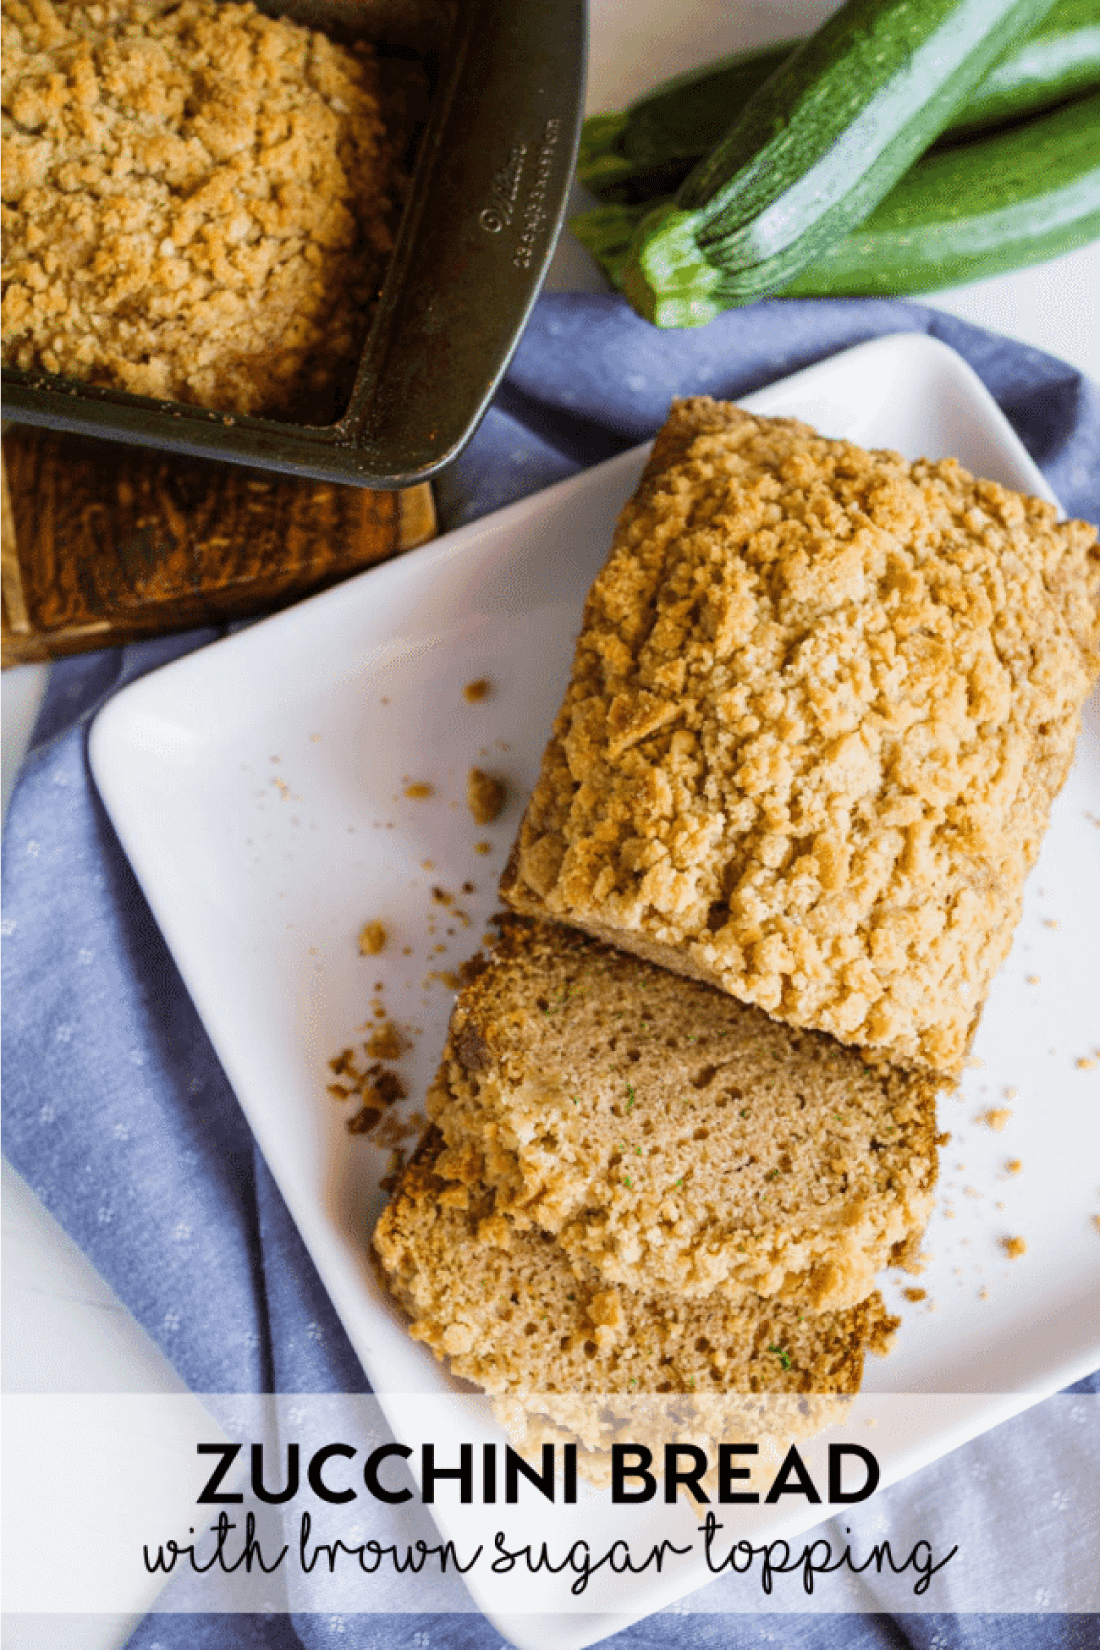 Zucchini Bread with Brown Sugar Topping - try this amazing quick bread. It's so easy to make and delicious! 